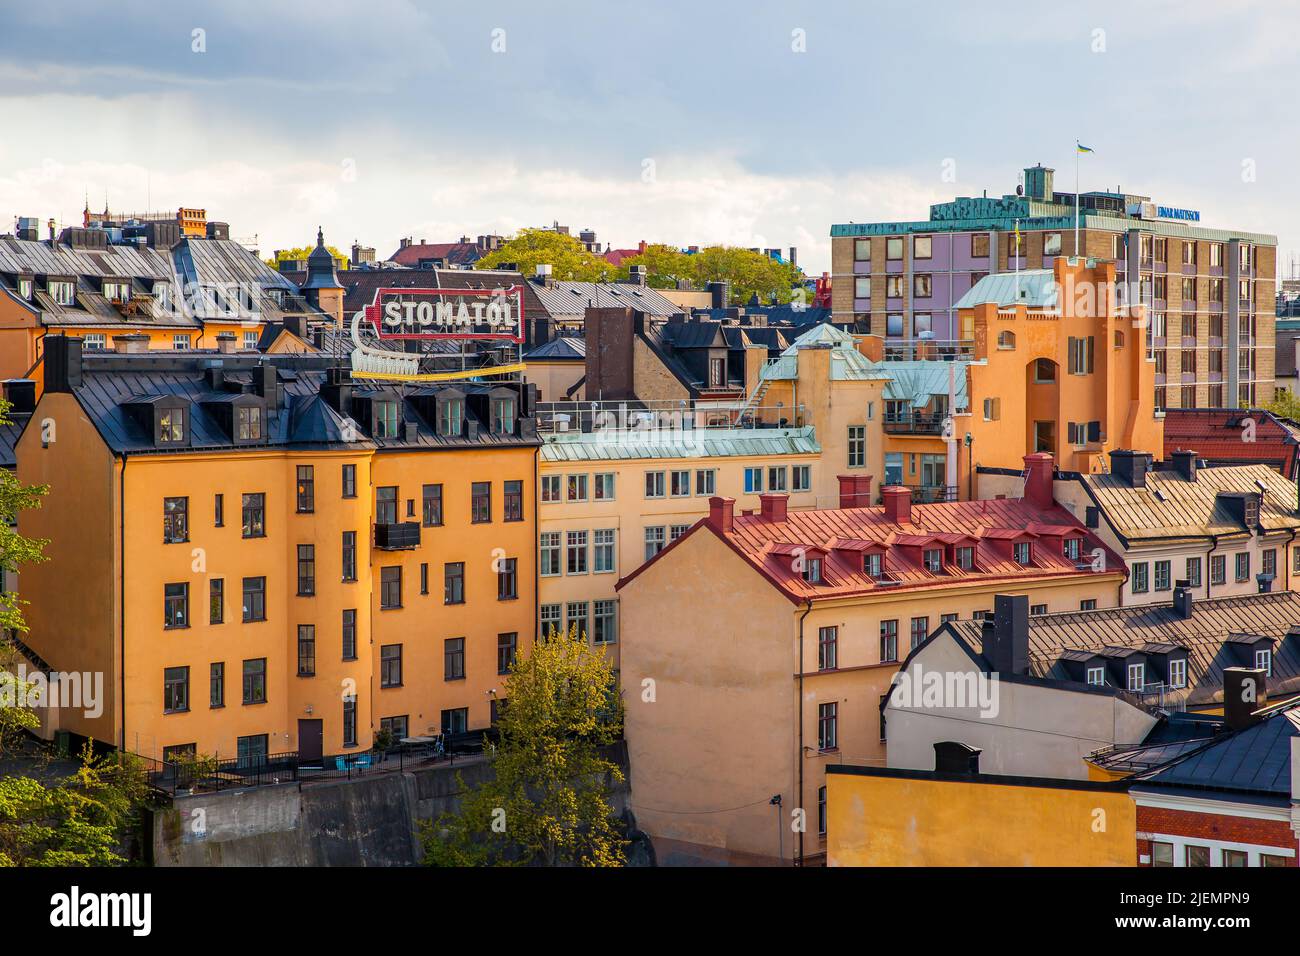 Stockholm, Sweden - May 21, 2015: Residential buildings nearby Slussen station in Stockholm Stock Photo